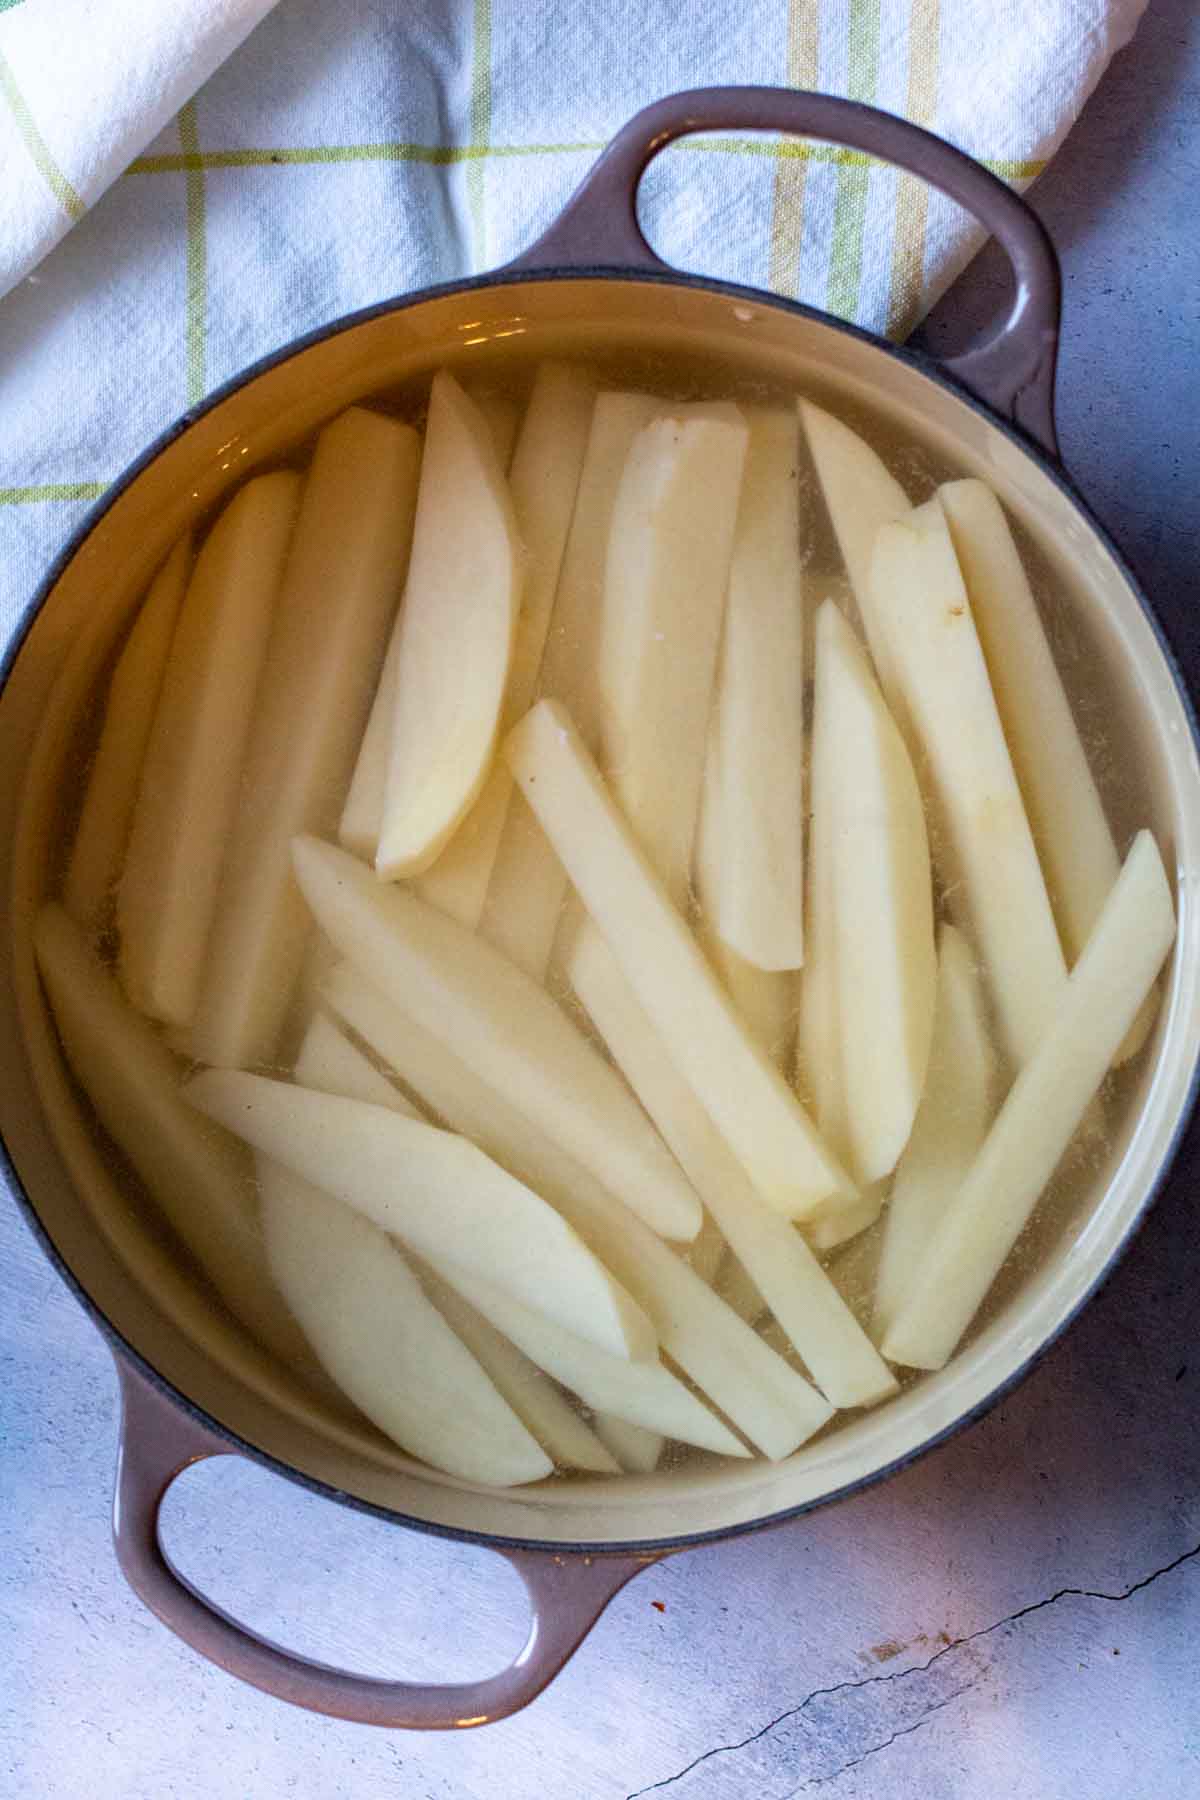 Parboiling potatoes for oven baked home fries.